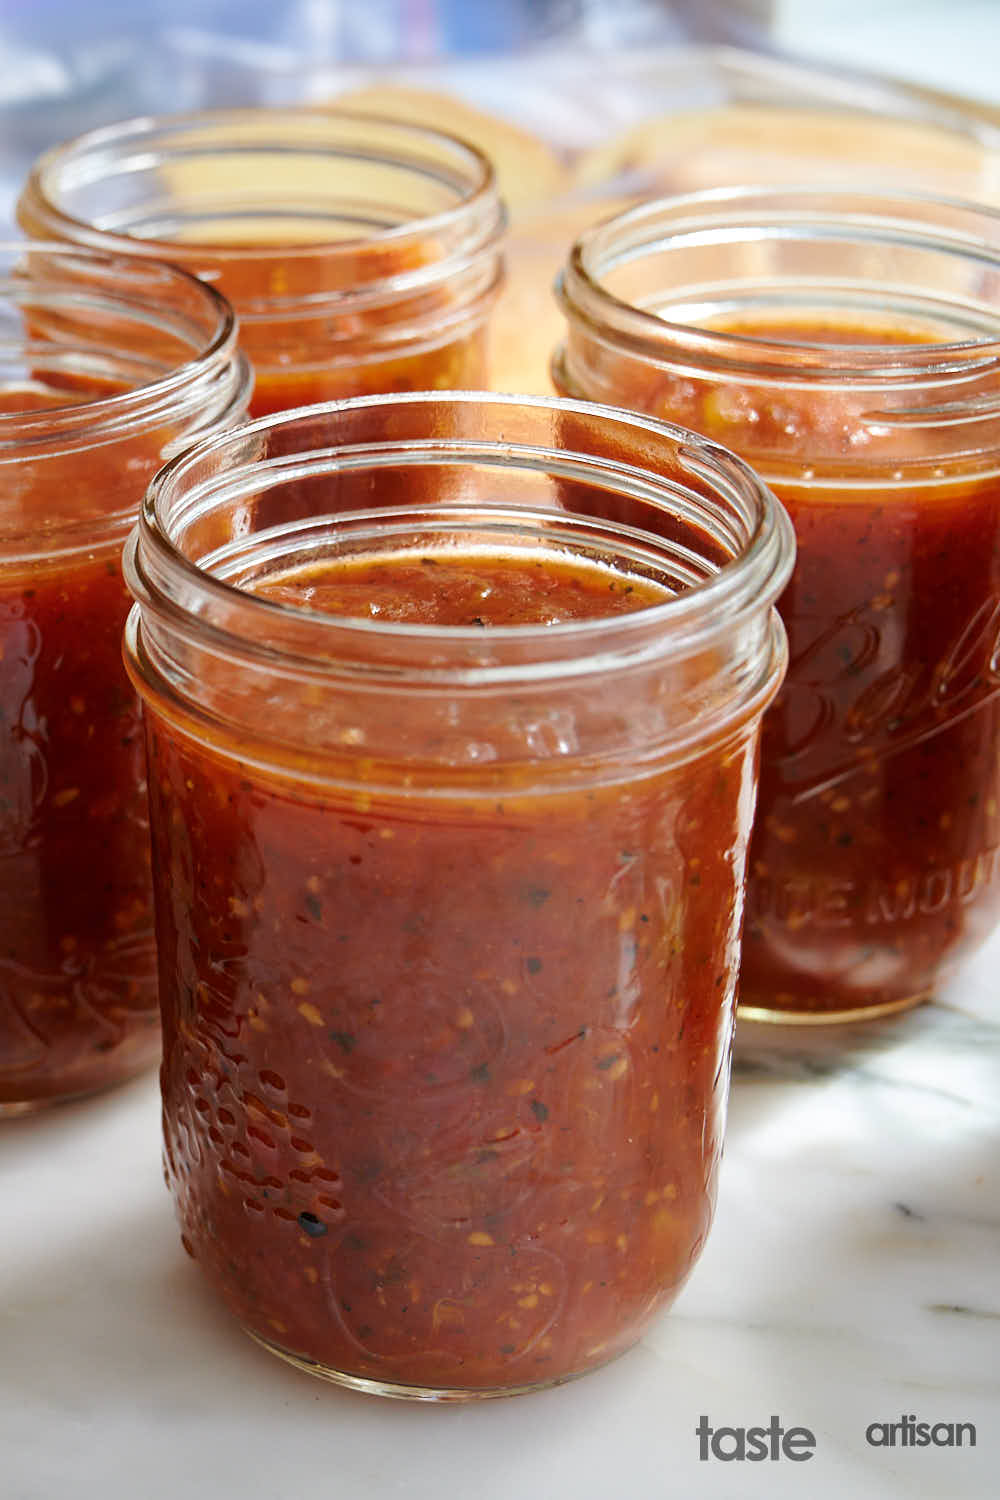 Homemade canned tomato sauce in jars.